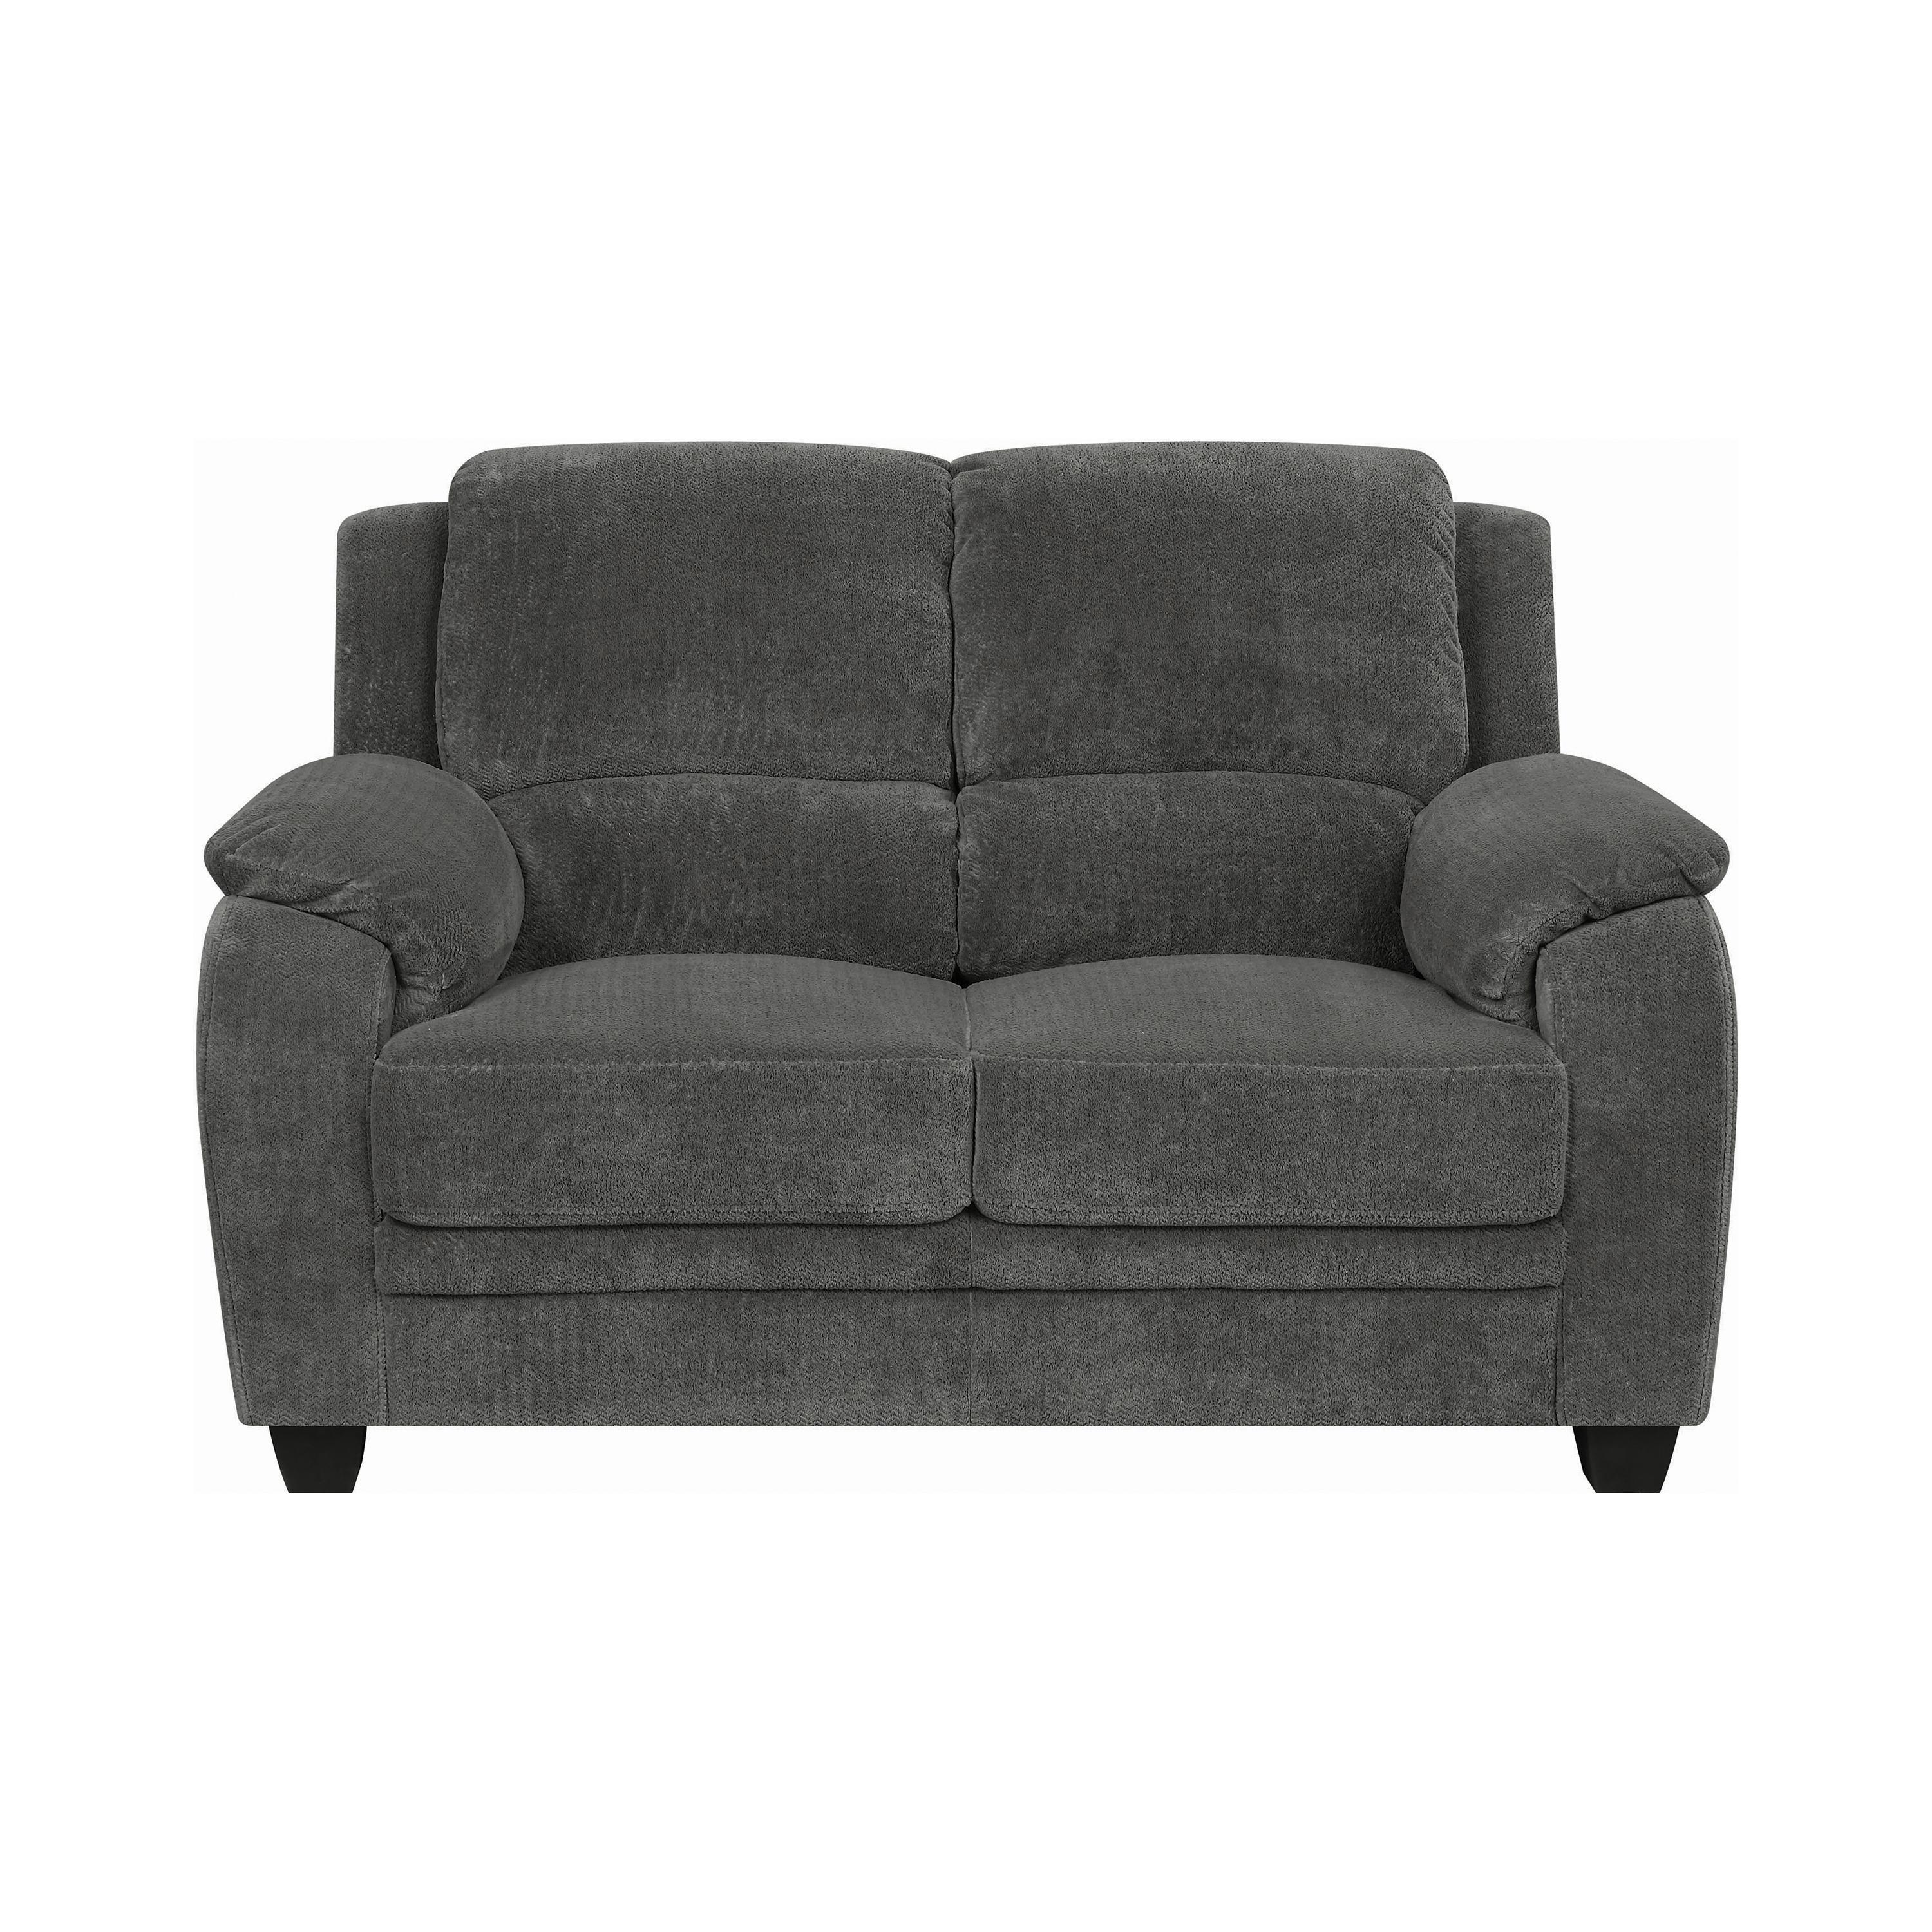 Transitional Loveseat 506242 Northend 506242 in Charcoal 